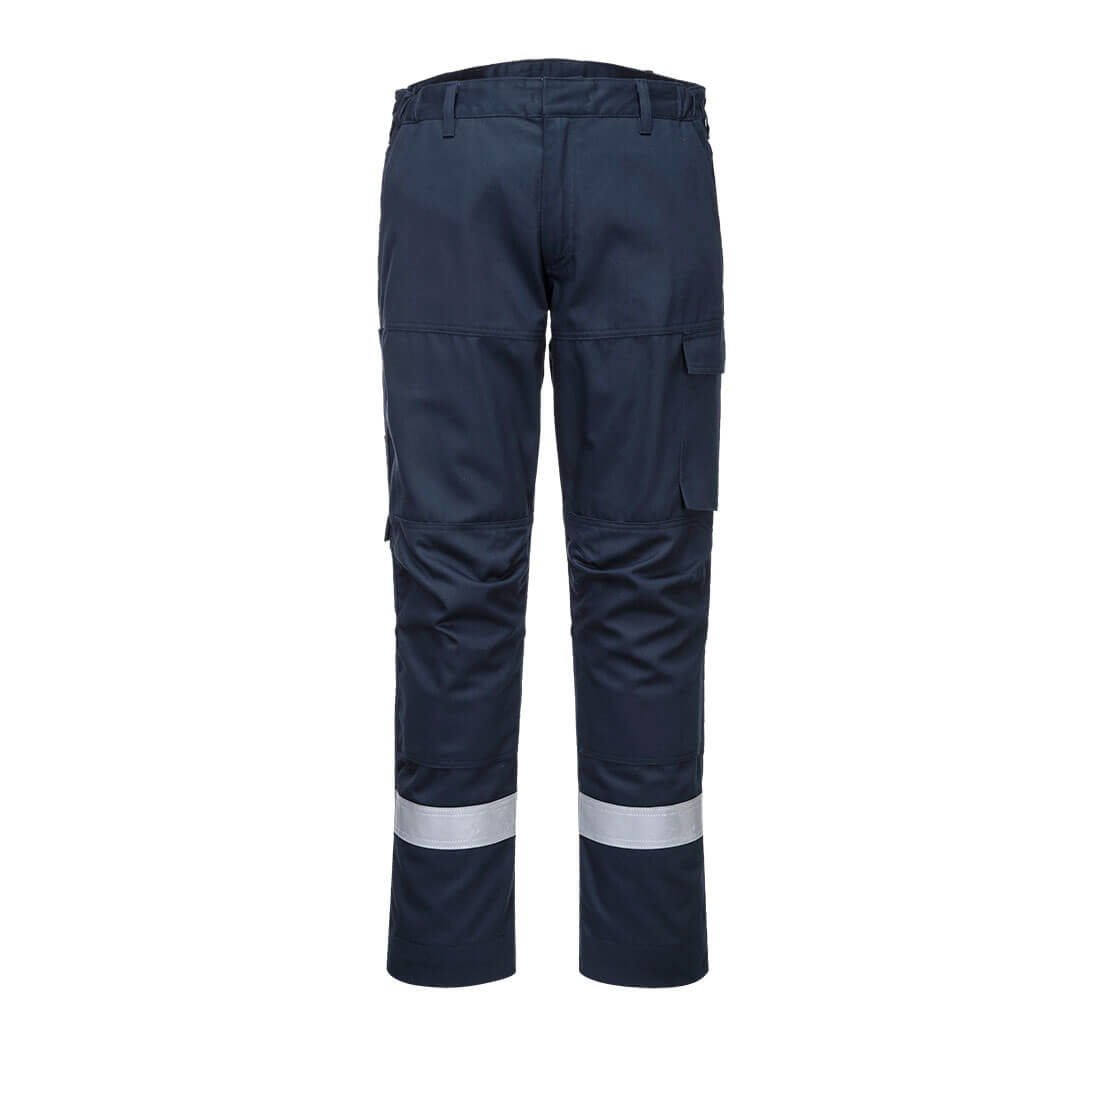 Bizflame Ultra Trousers